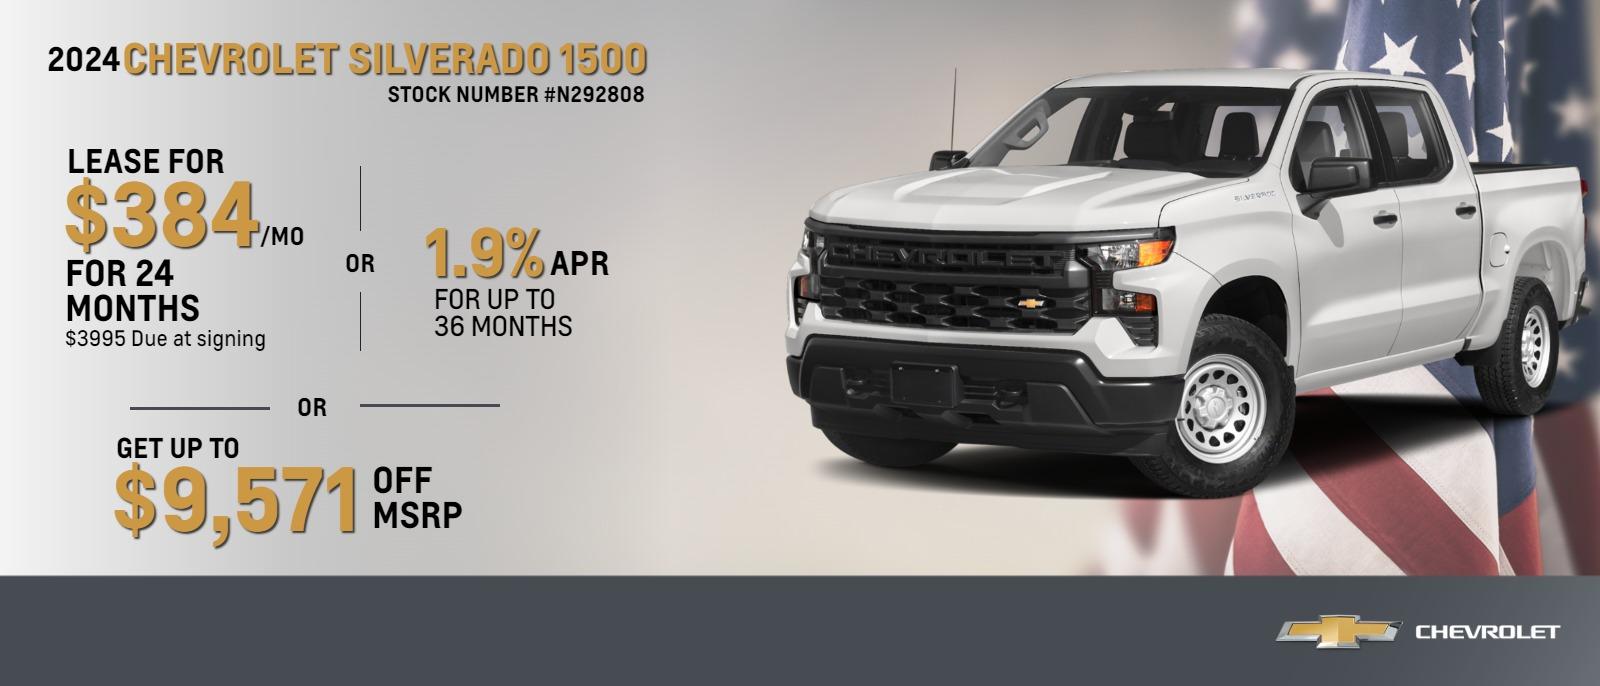 2024 Chevrolet Silverado 1500
Leasses Start at $384 per month with $3995 out of pocket 
Get up to $9571 off 
1.9% Financing Available